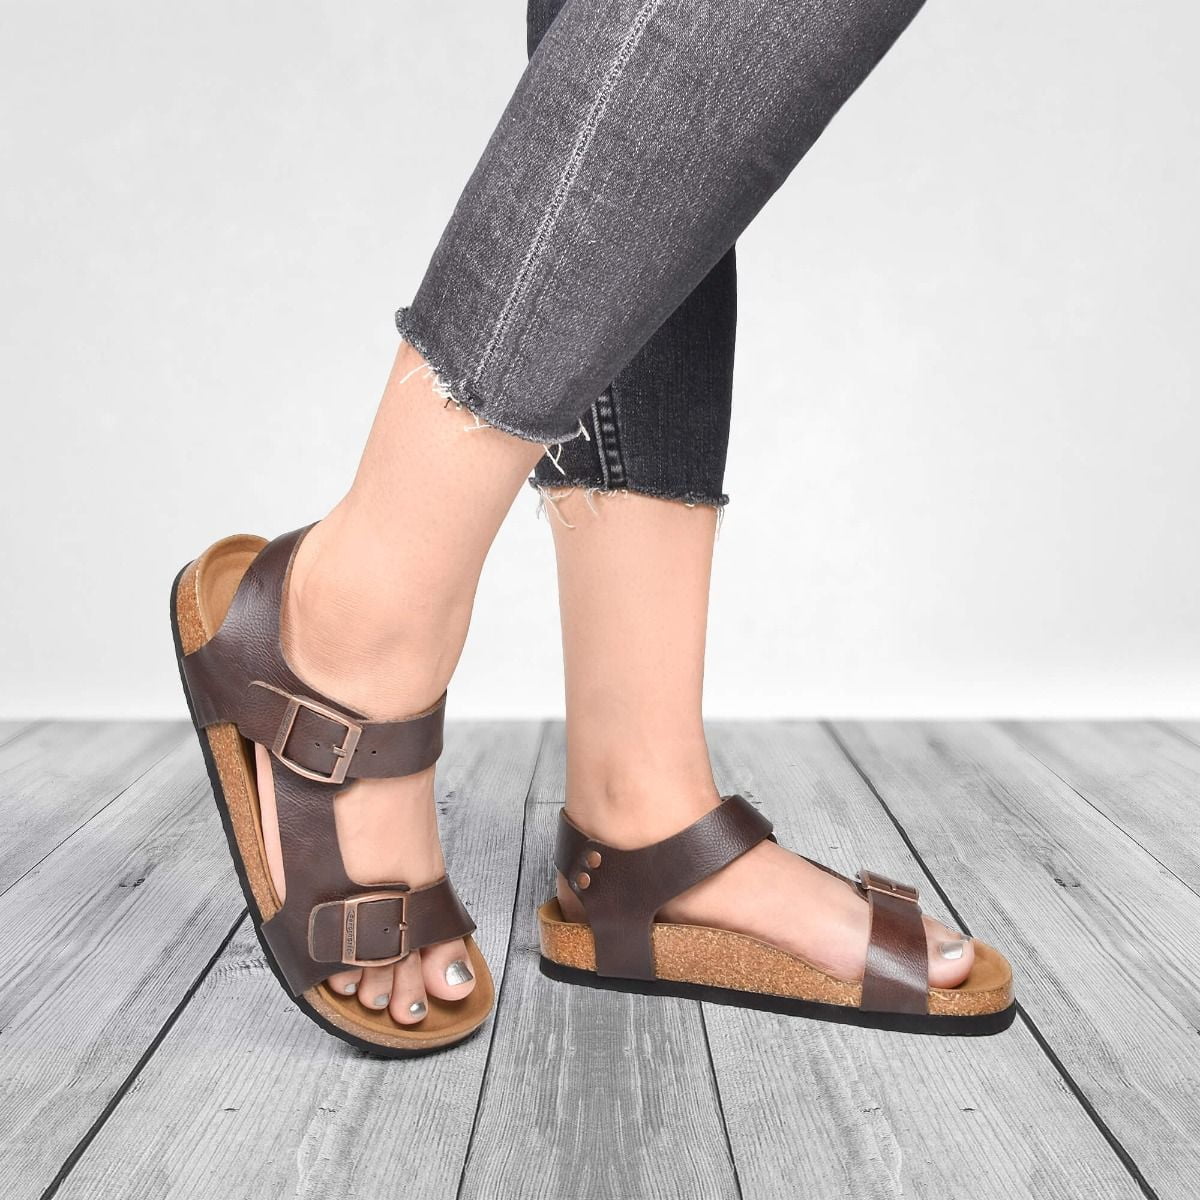 good arch support sandals